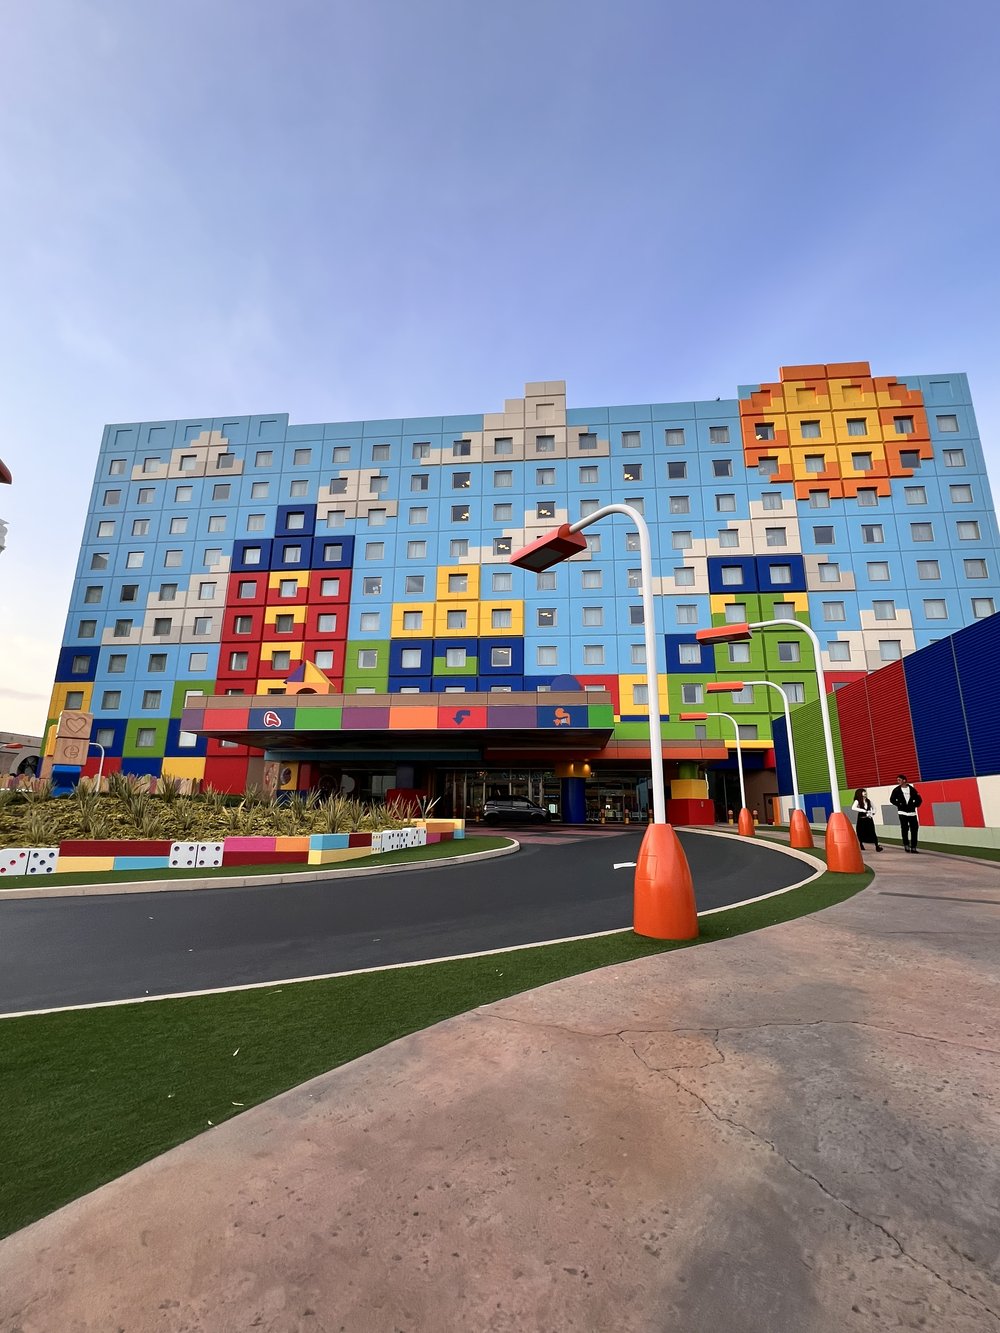  Exterior view of Toy Story Hotel building 